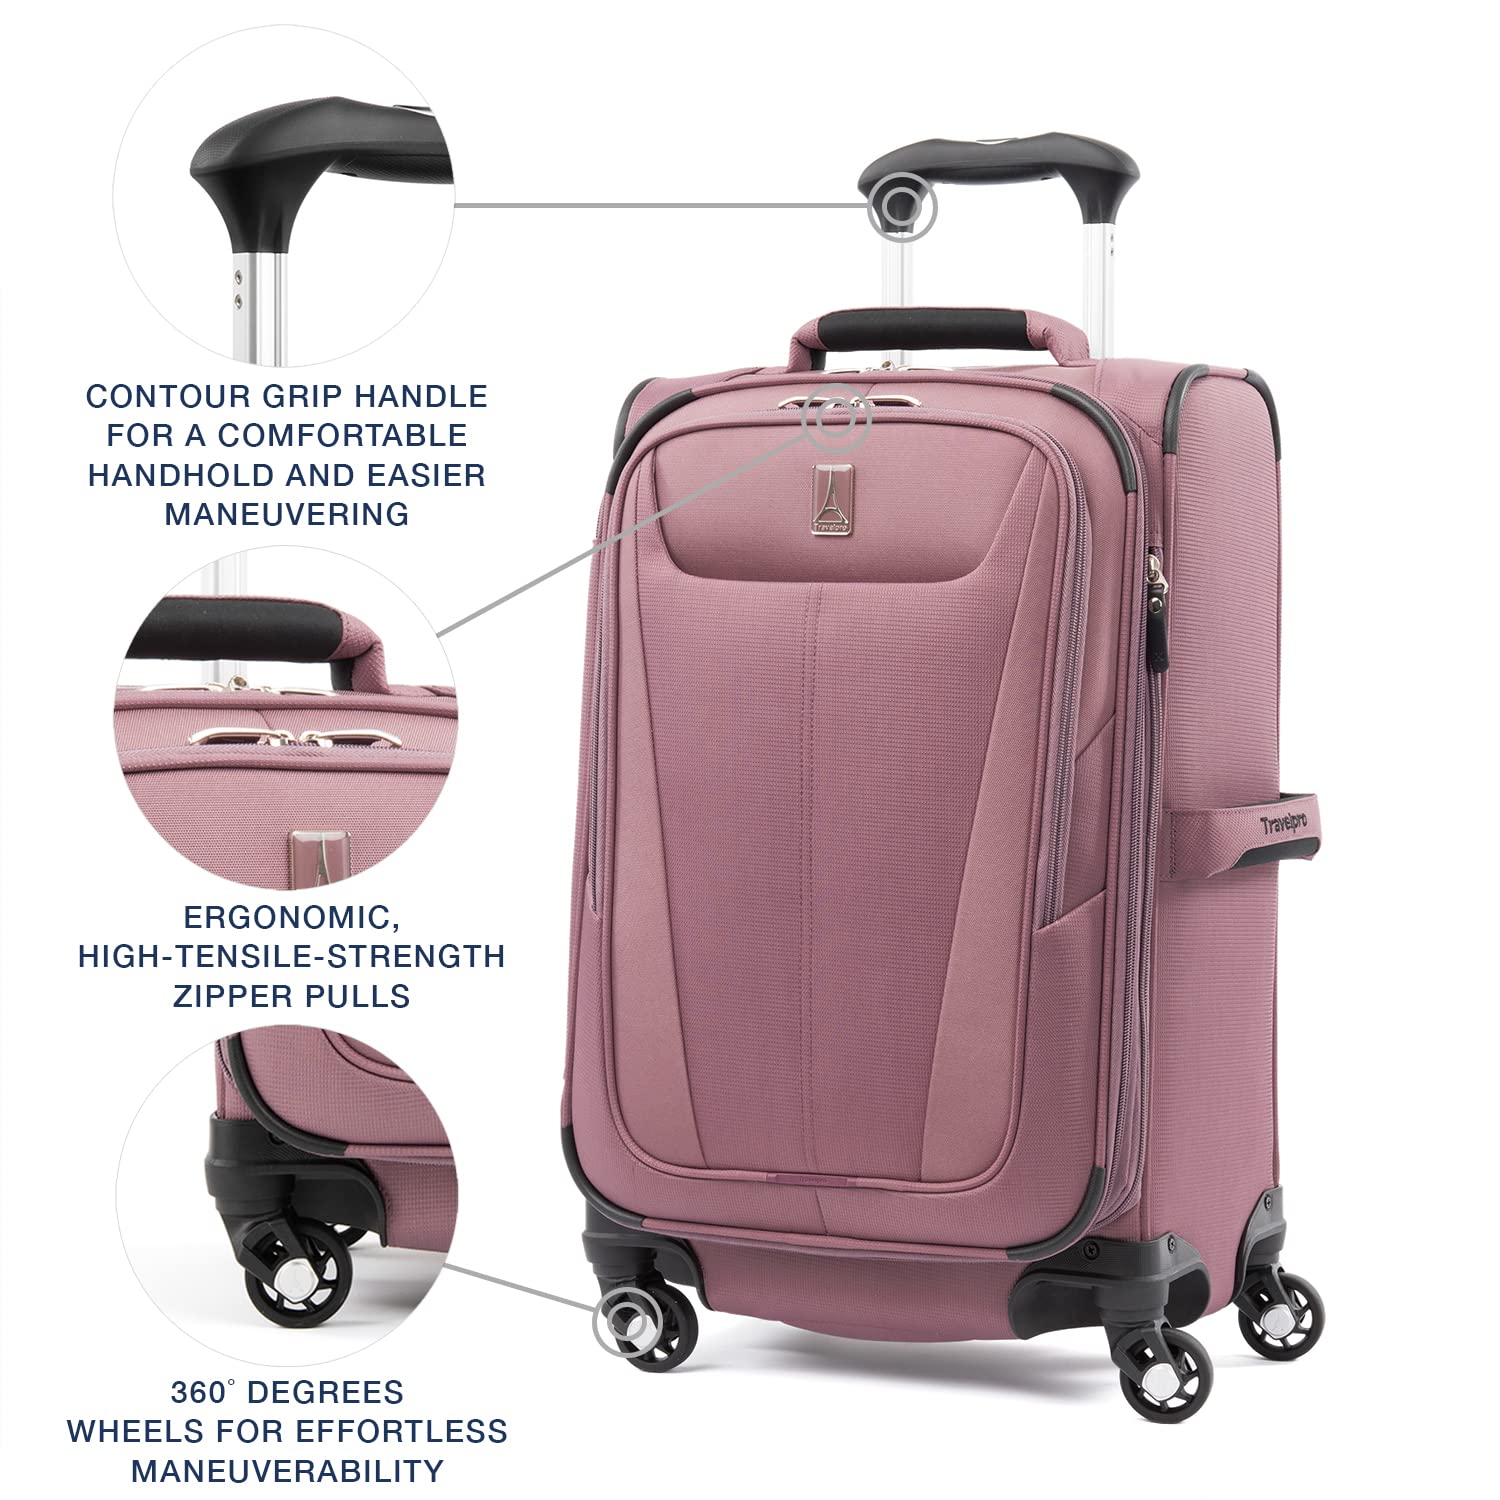 Travelpro Maxlite 5 Softside Expandable Luggage with 4 Spinner Wheels, Lightweight Suitcase, Men and Women U3